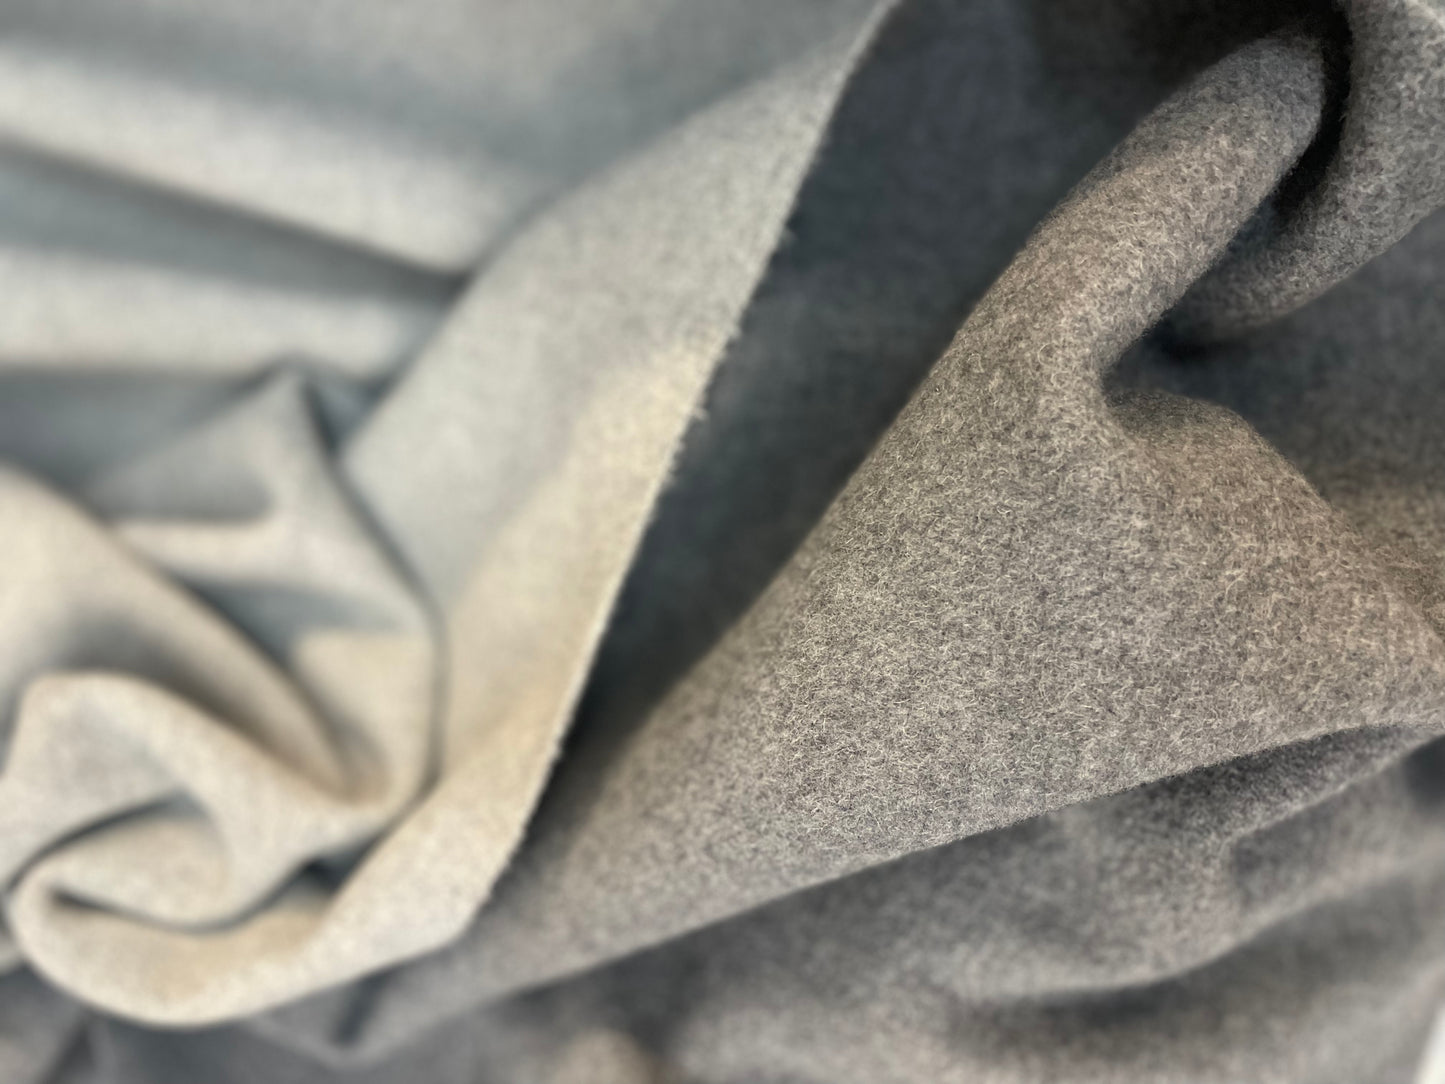 Italian Double-Sided Brushed Twill Lightweight Wool Blend Coating - Heather  Grey /Beige - Fabric by the Yard